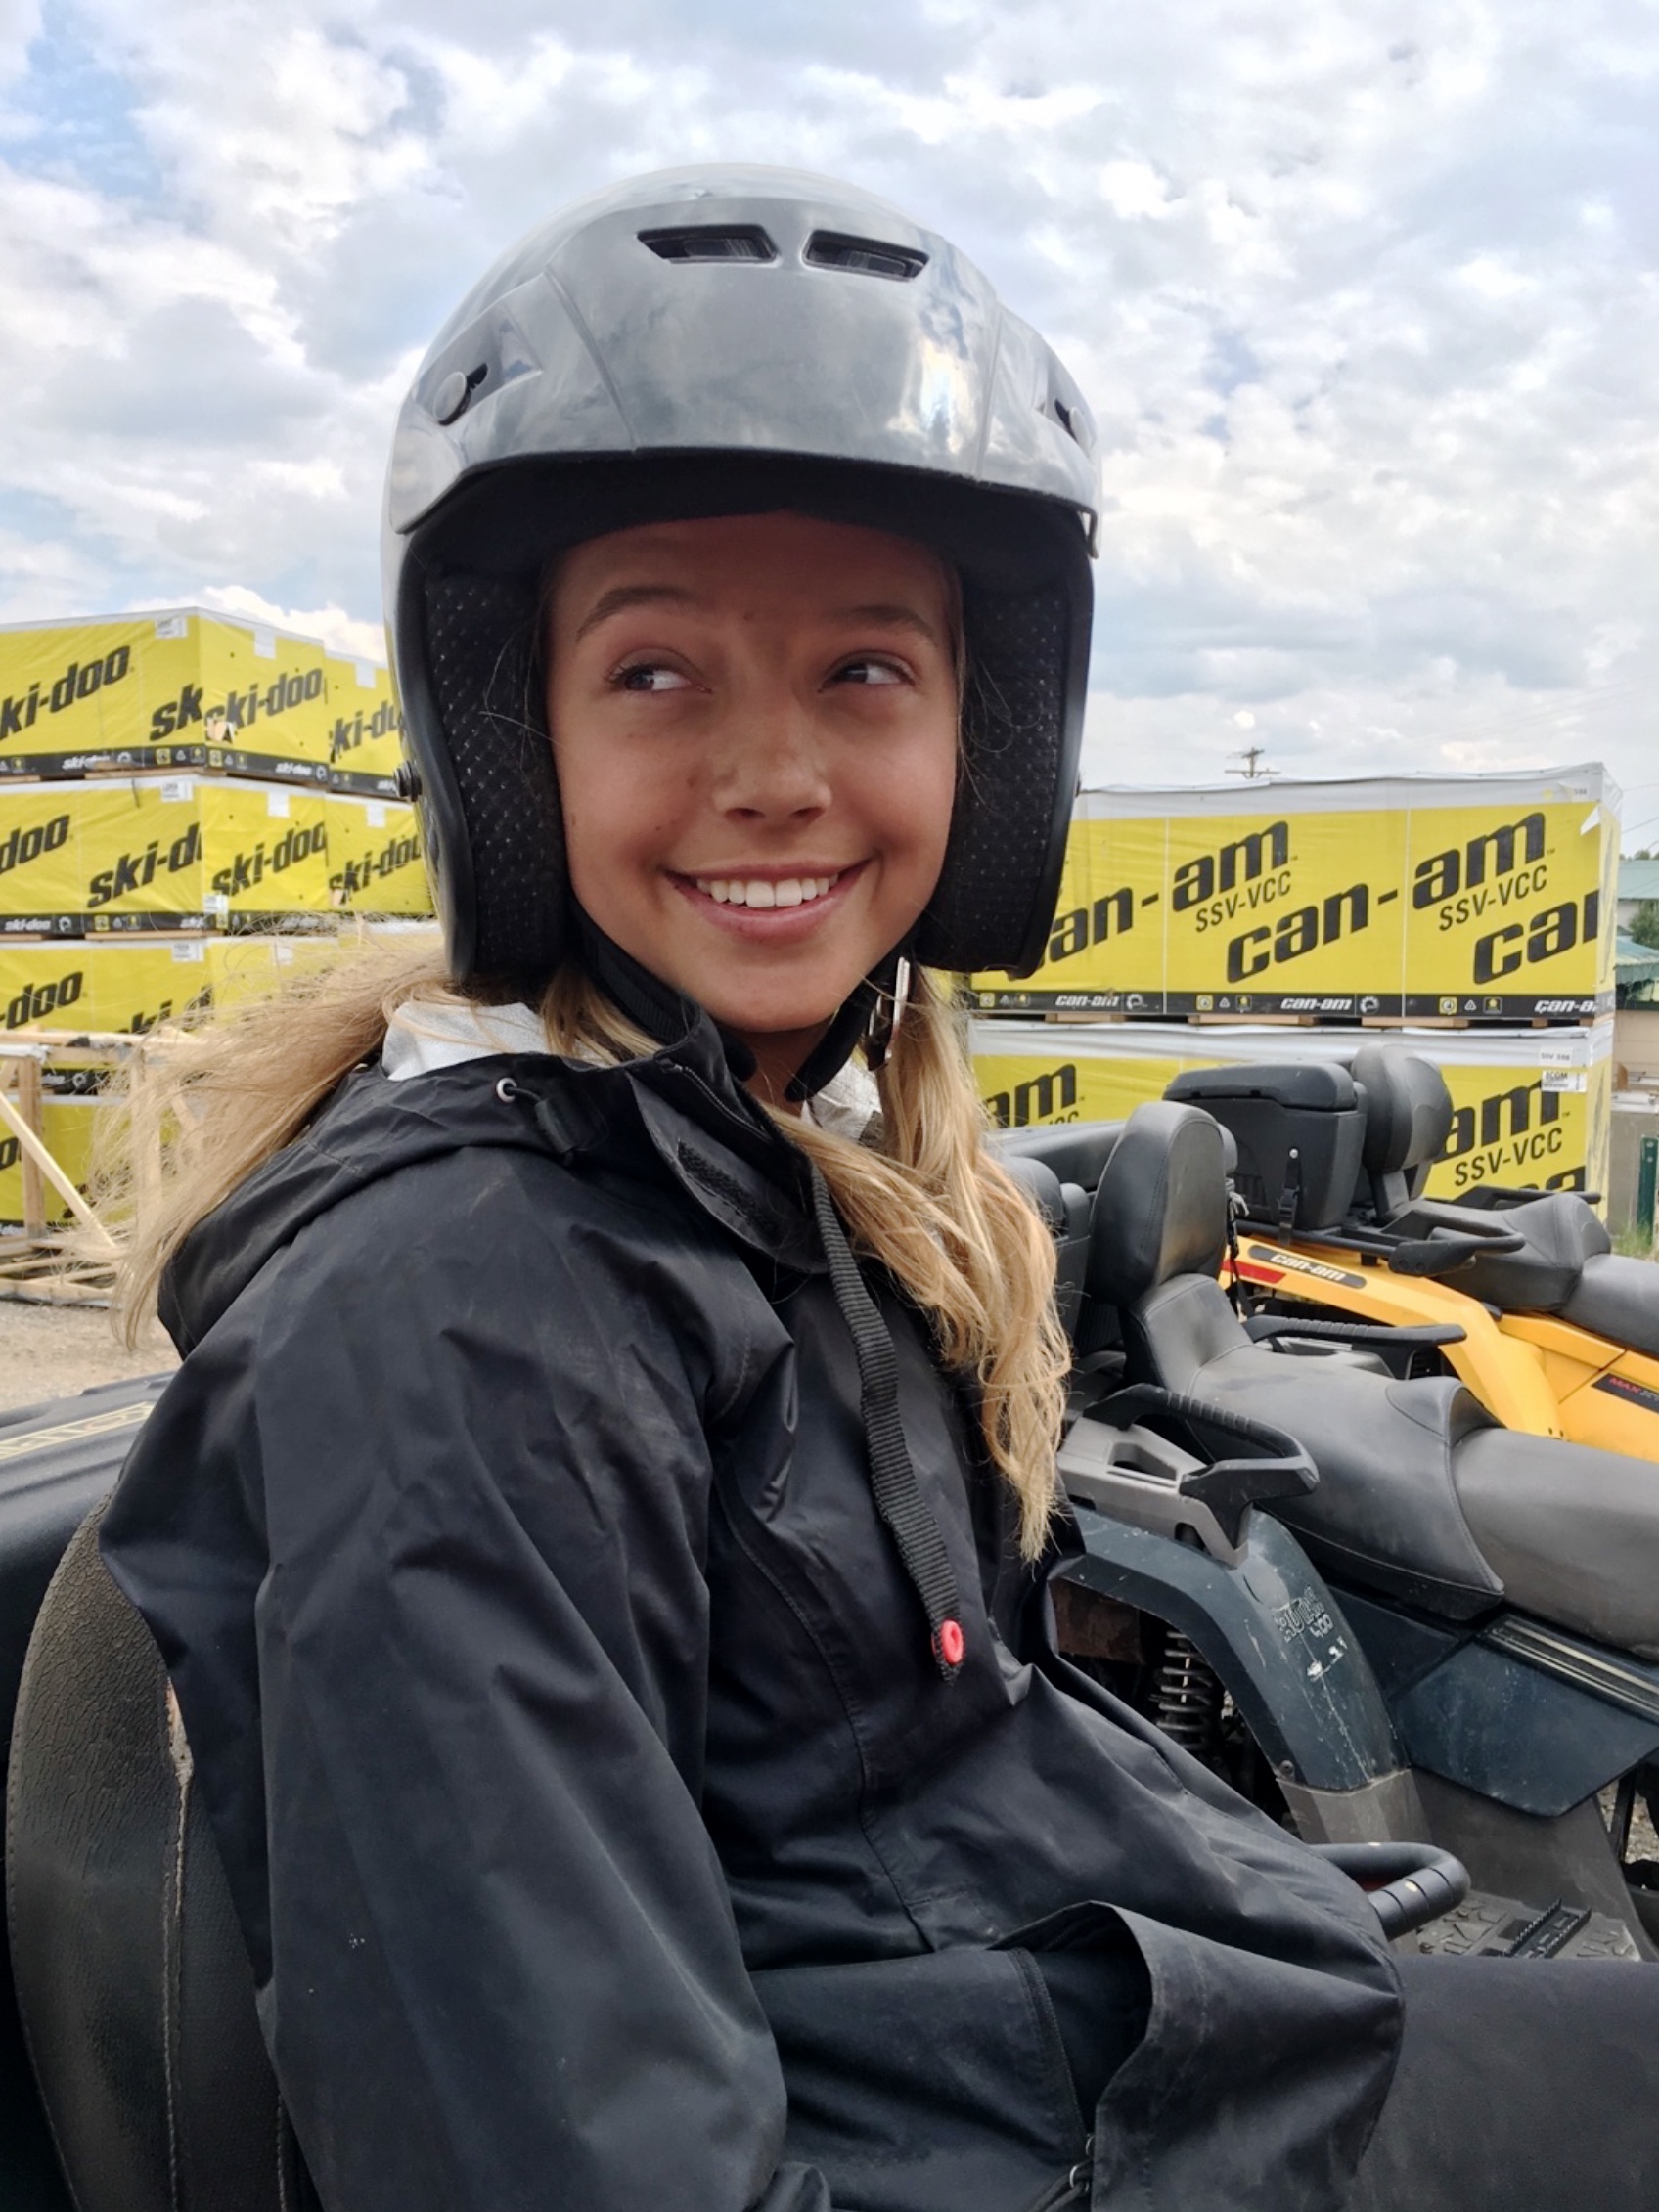 Girl with helmet on smiling.